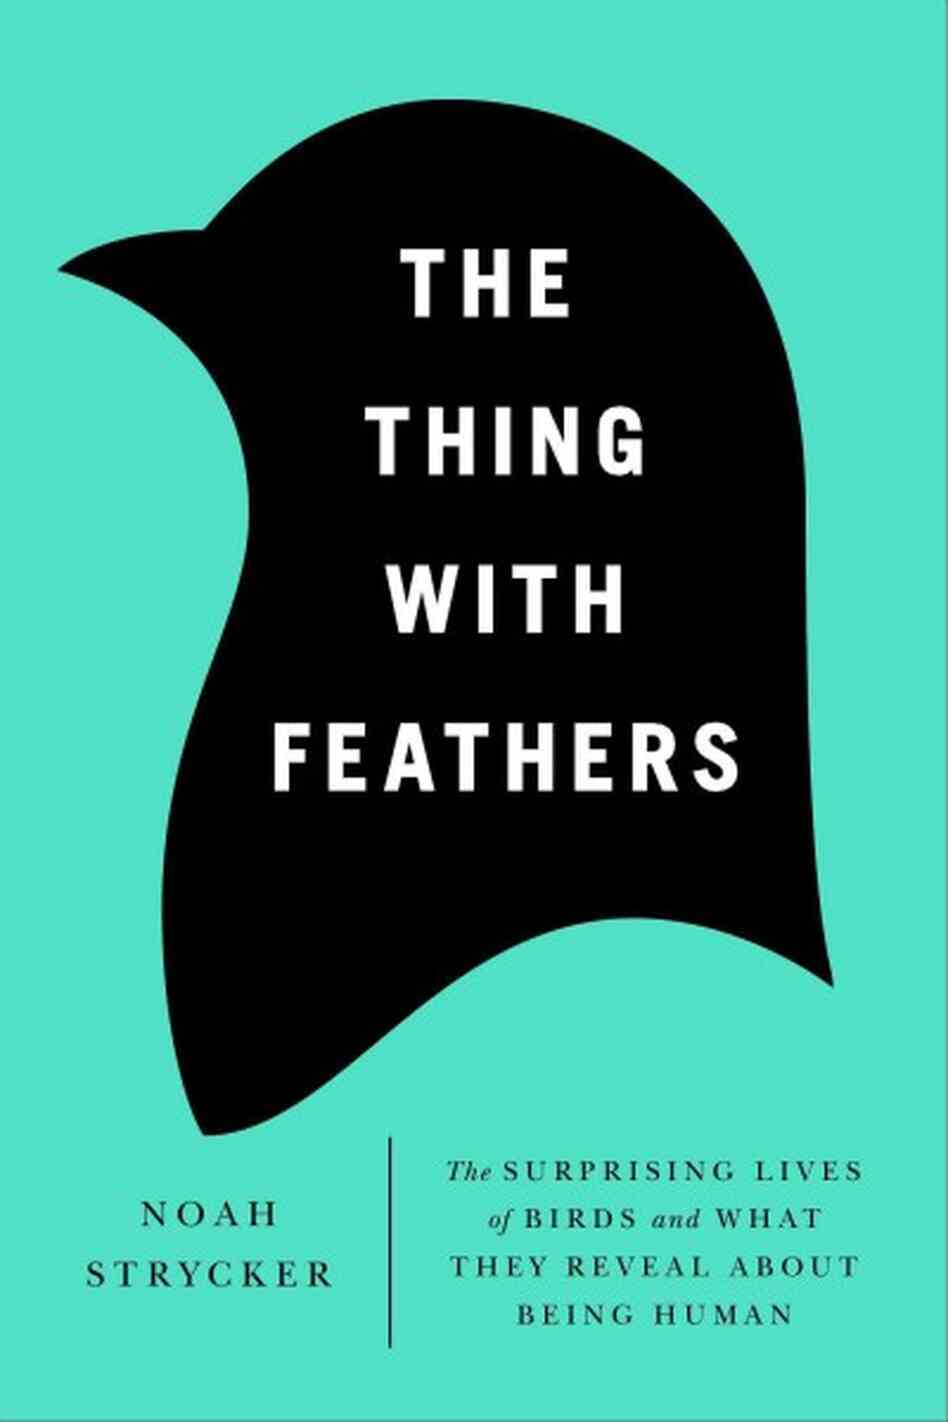 Noah K. Strycker: The Thing with Feathers (2014, Riverhead Books)